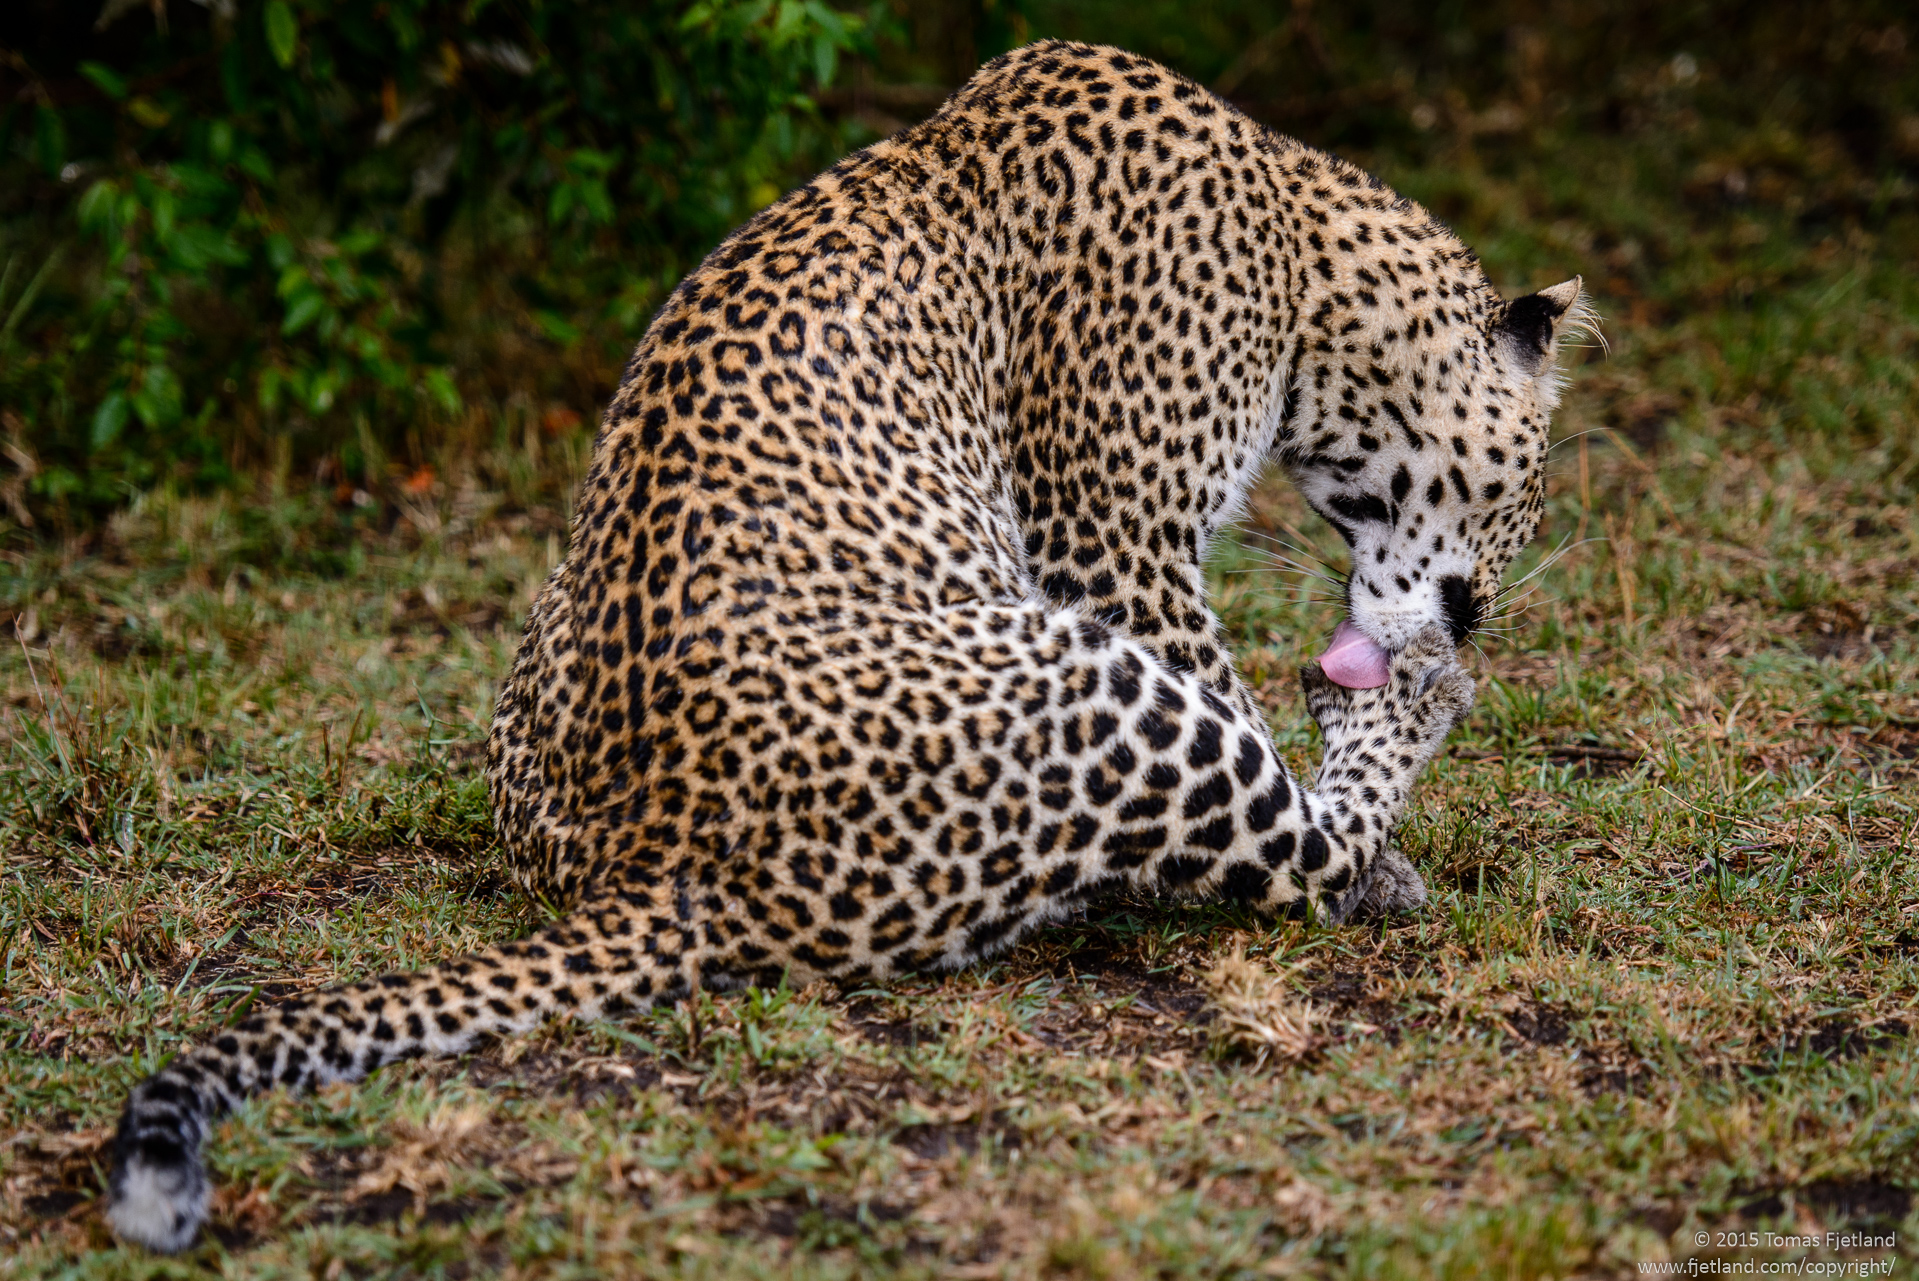 Leopard Fig treating herself to a pedicure